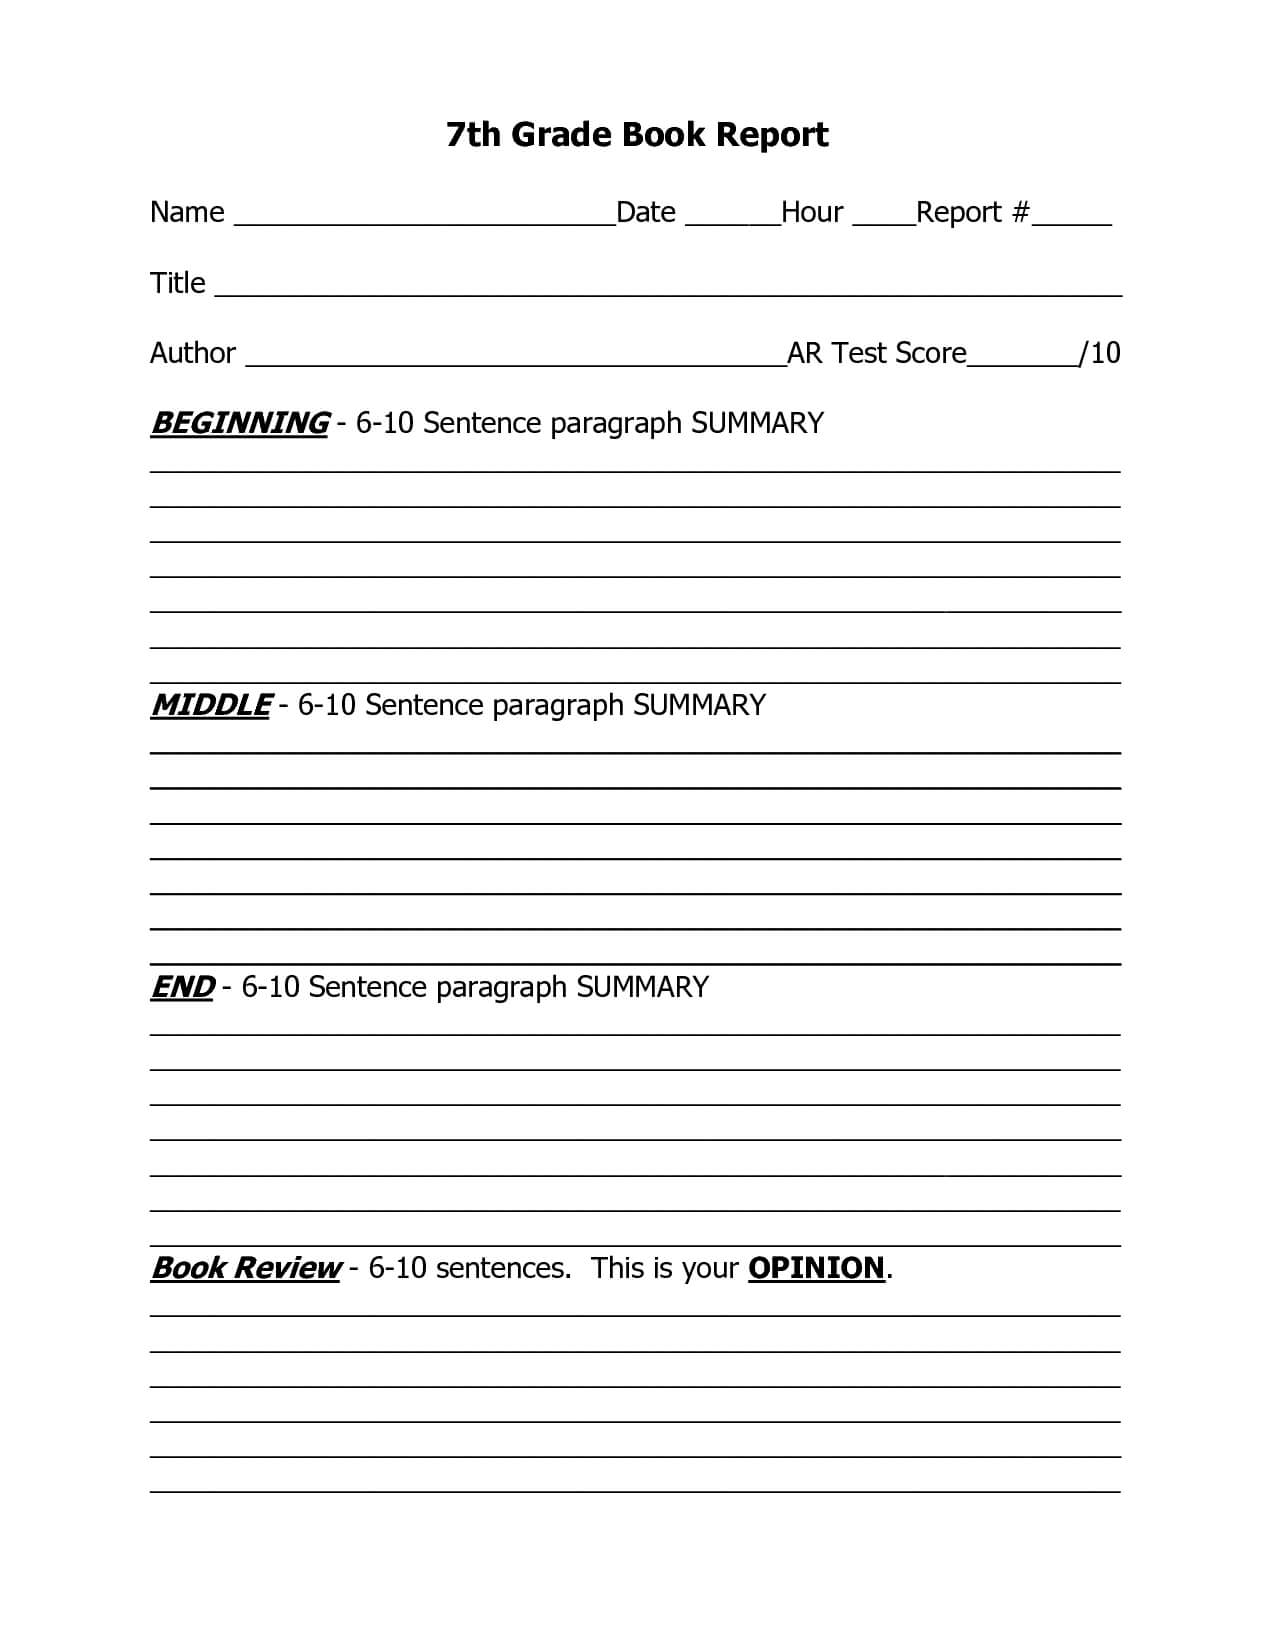 7Th Grade Book Report Outline Template | Kid Stuff | Book With Middle School Book Report Template